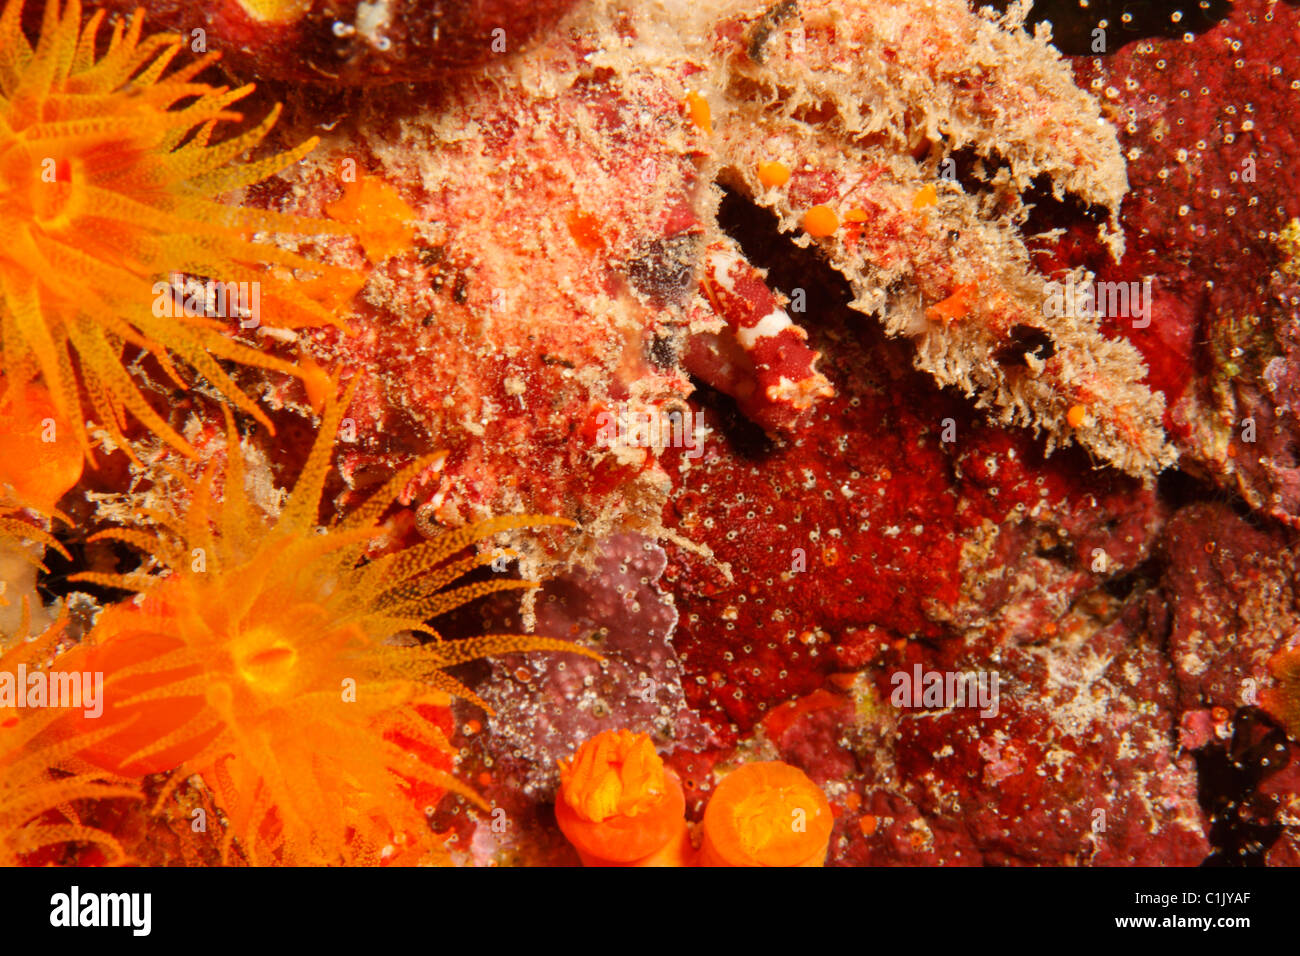 Unknown species of highly-camouflaged decorator crab covered with  filamentous algae, Puri Jati, Bali, Indonesia Stock Photo - Alamy